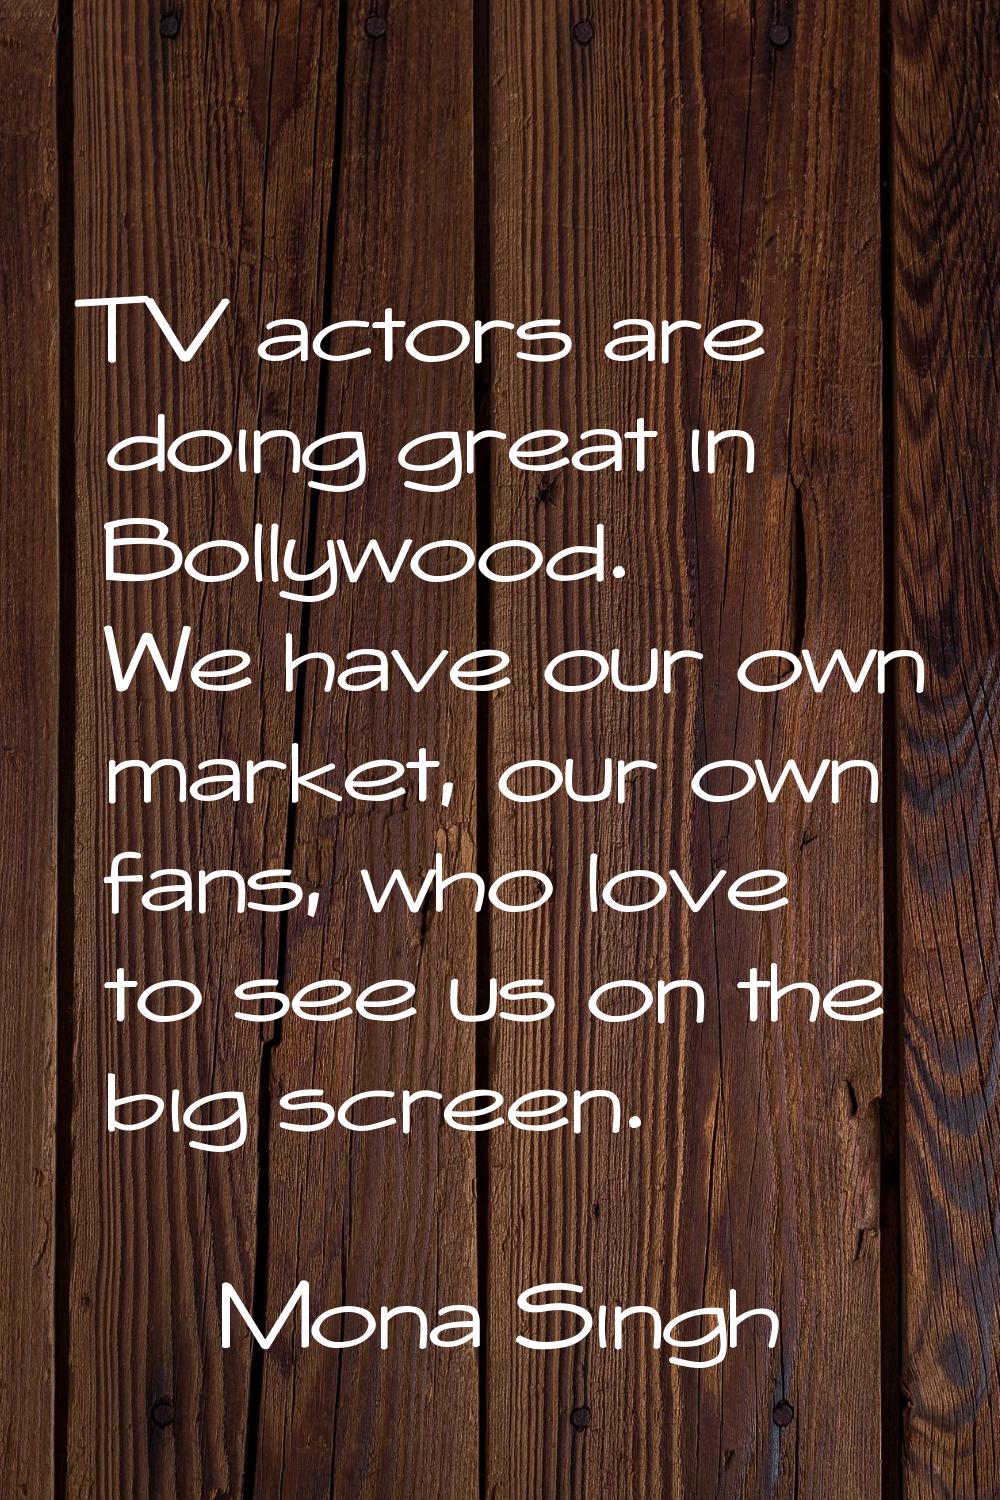 TV actors are doing great in Bollywood. We have our own market, our own fans, who love to see us on